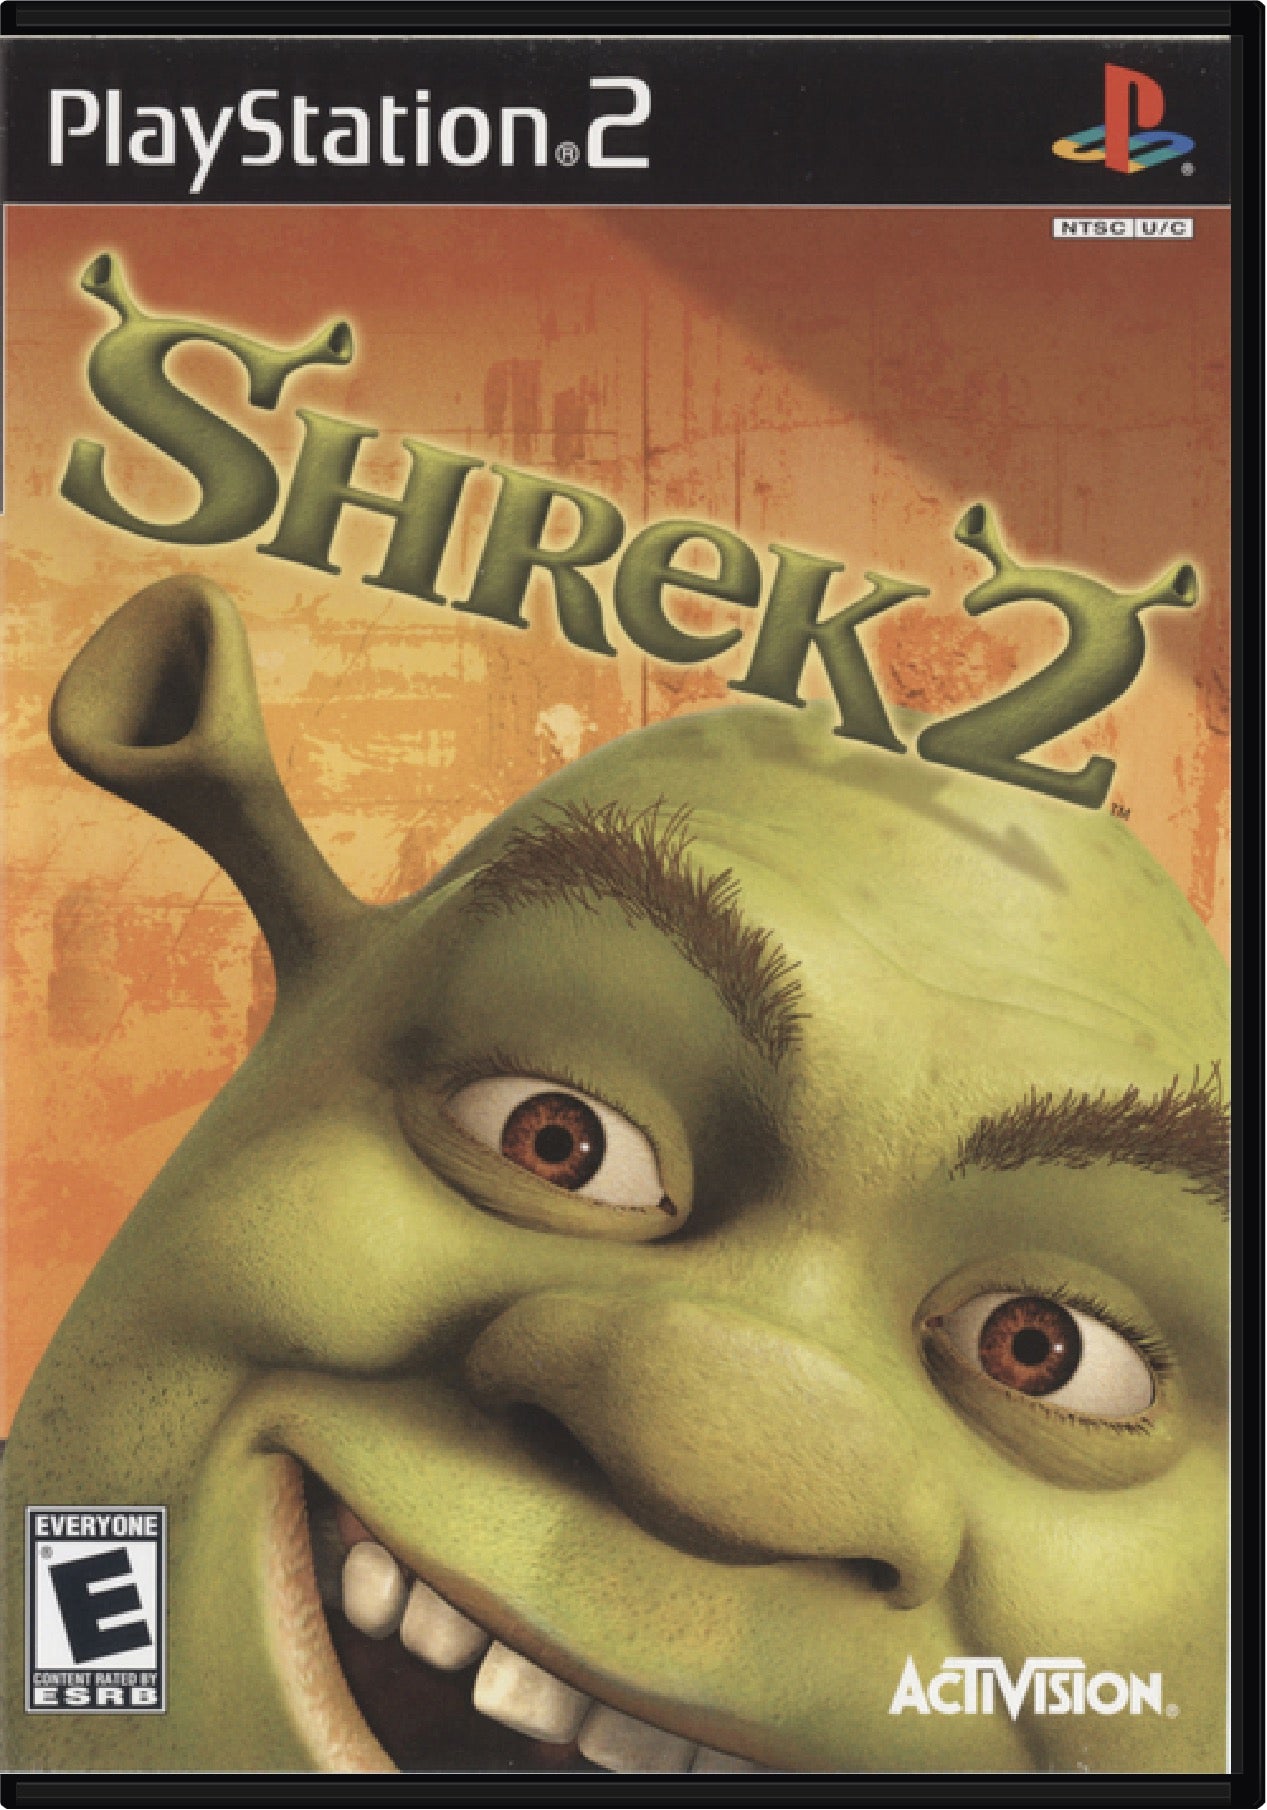 Shrek 2 Cover Art and Product Photo